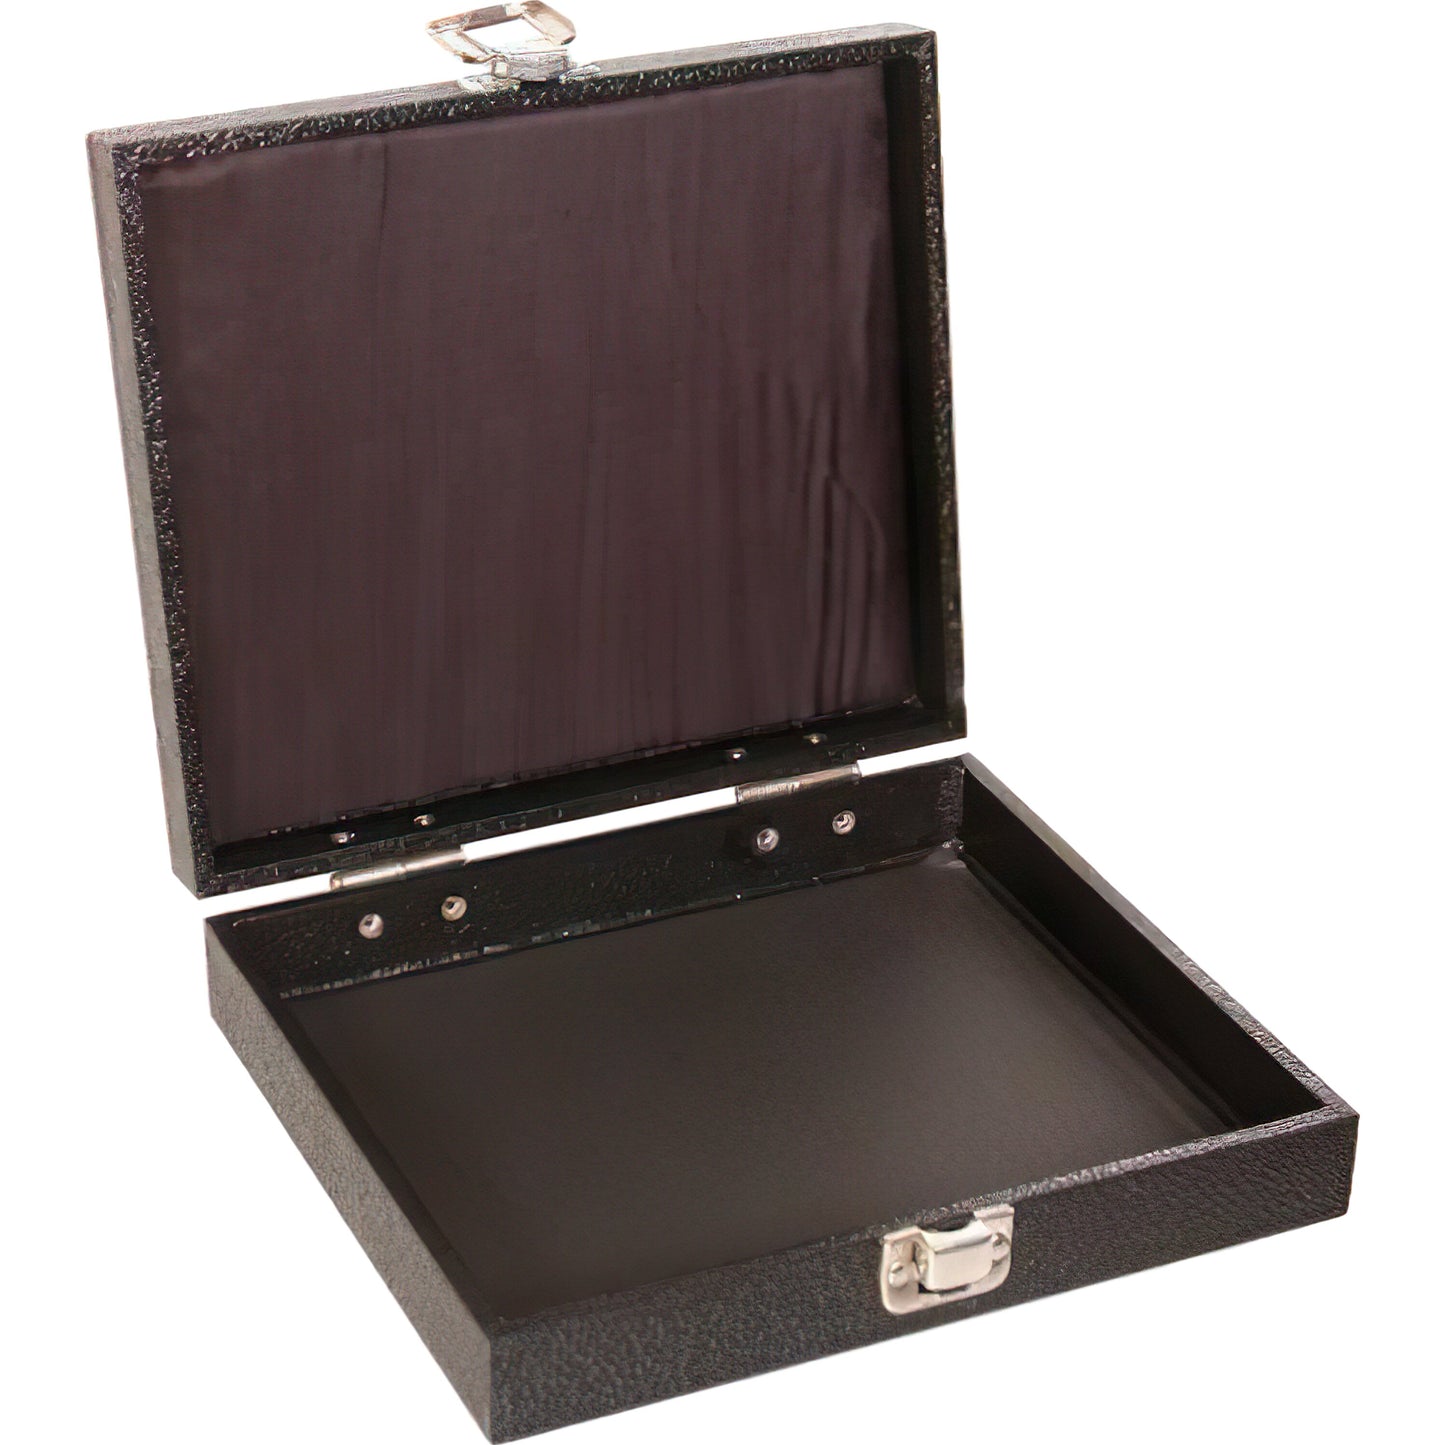 Clasp Lid Jewelry Display Case 8 1/4"